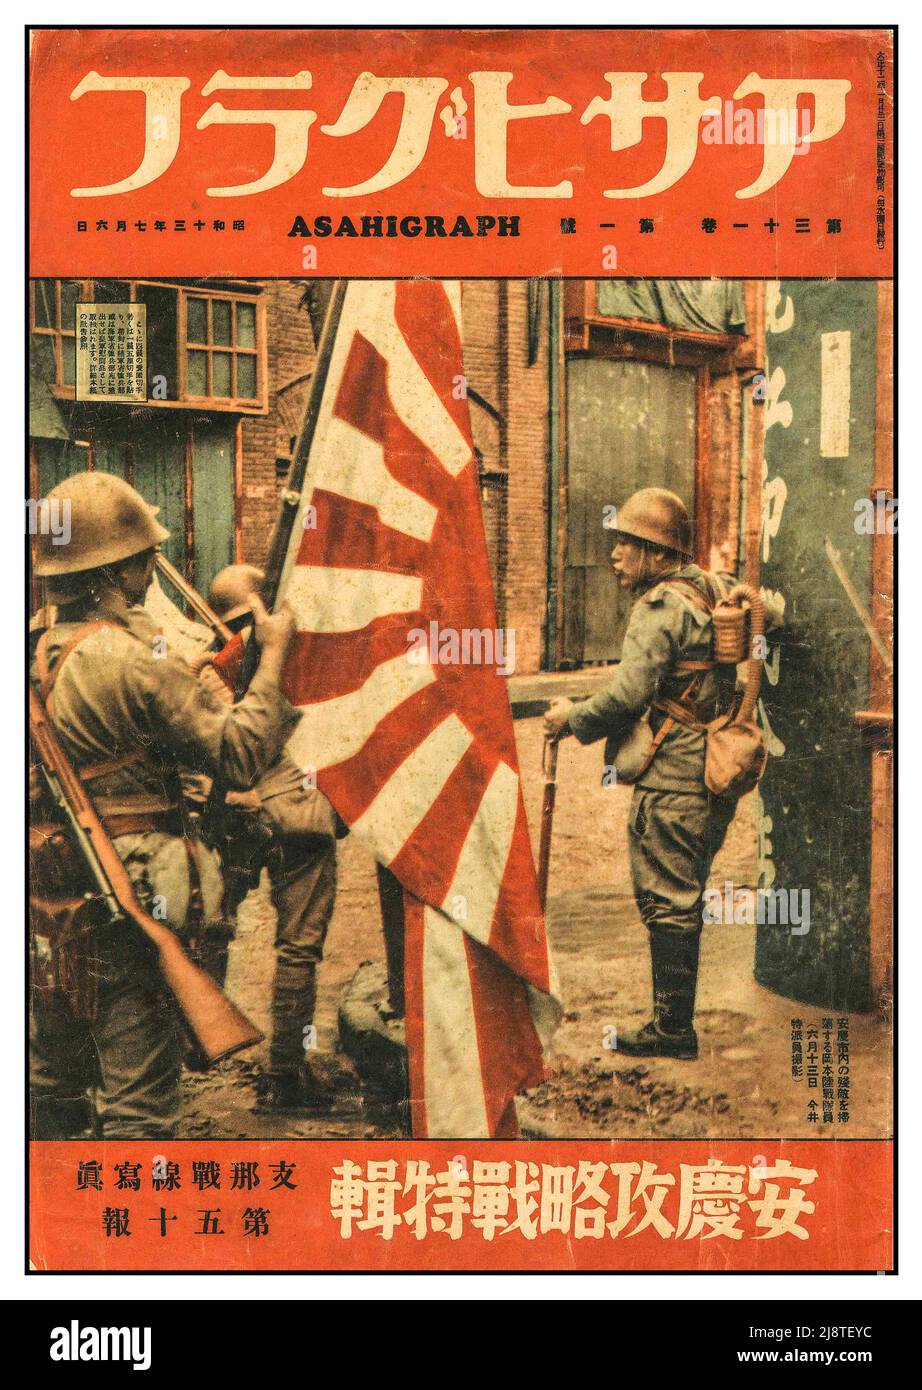 ASAHIGRAPH WW2 Japanese propaganda magazine featuring soldiers carrying the Imperial Flag of Japan The Cover of the Japanese Pictorial Weekly Magazine, Asahigraph, vol. 31 No. 1 World War II Second World War Stock Photo